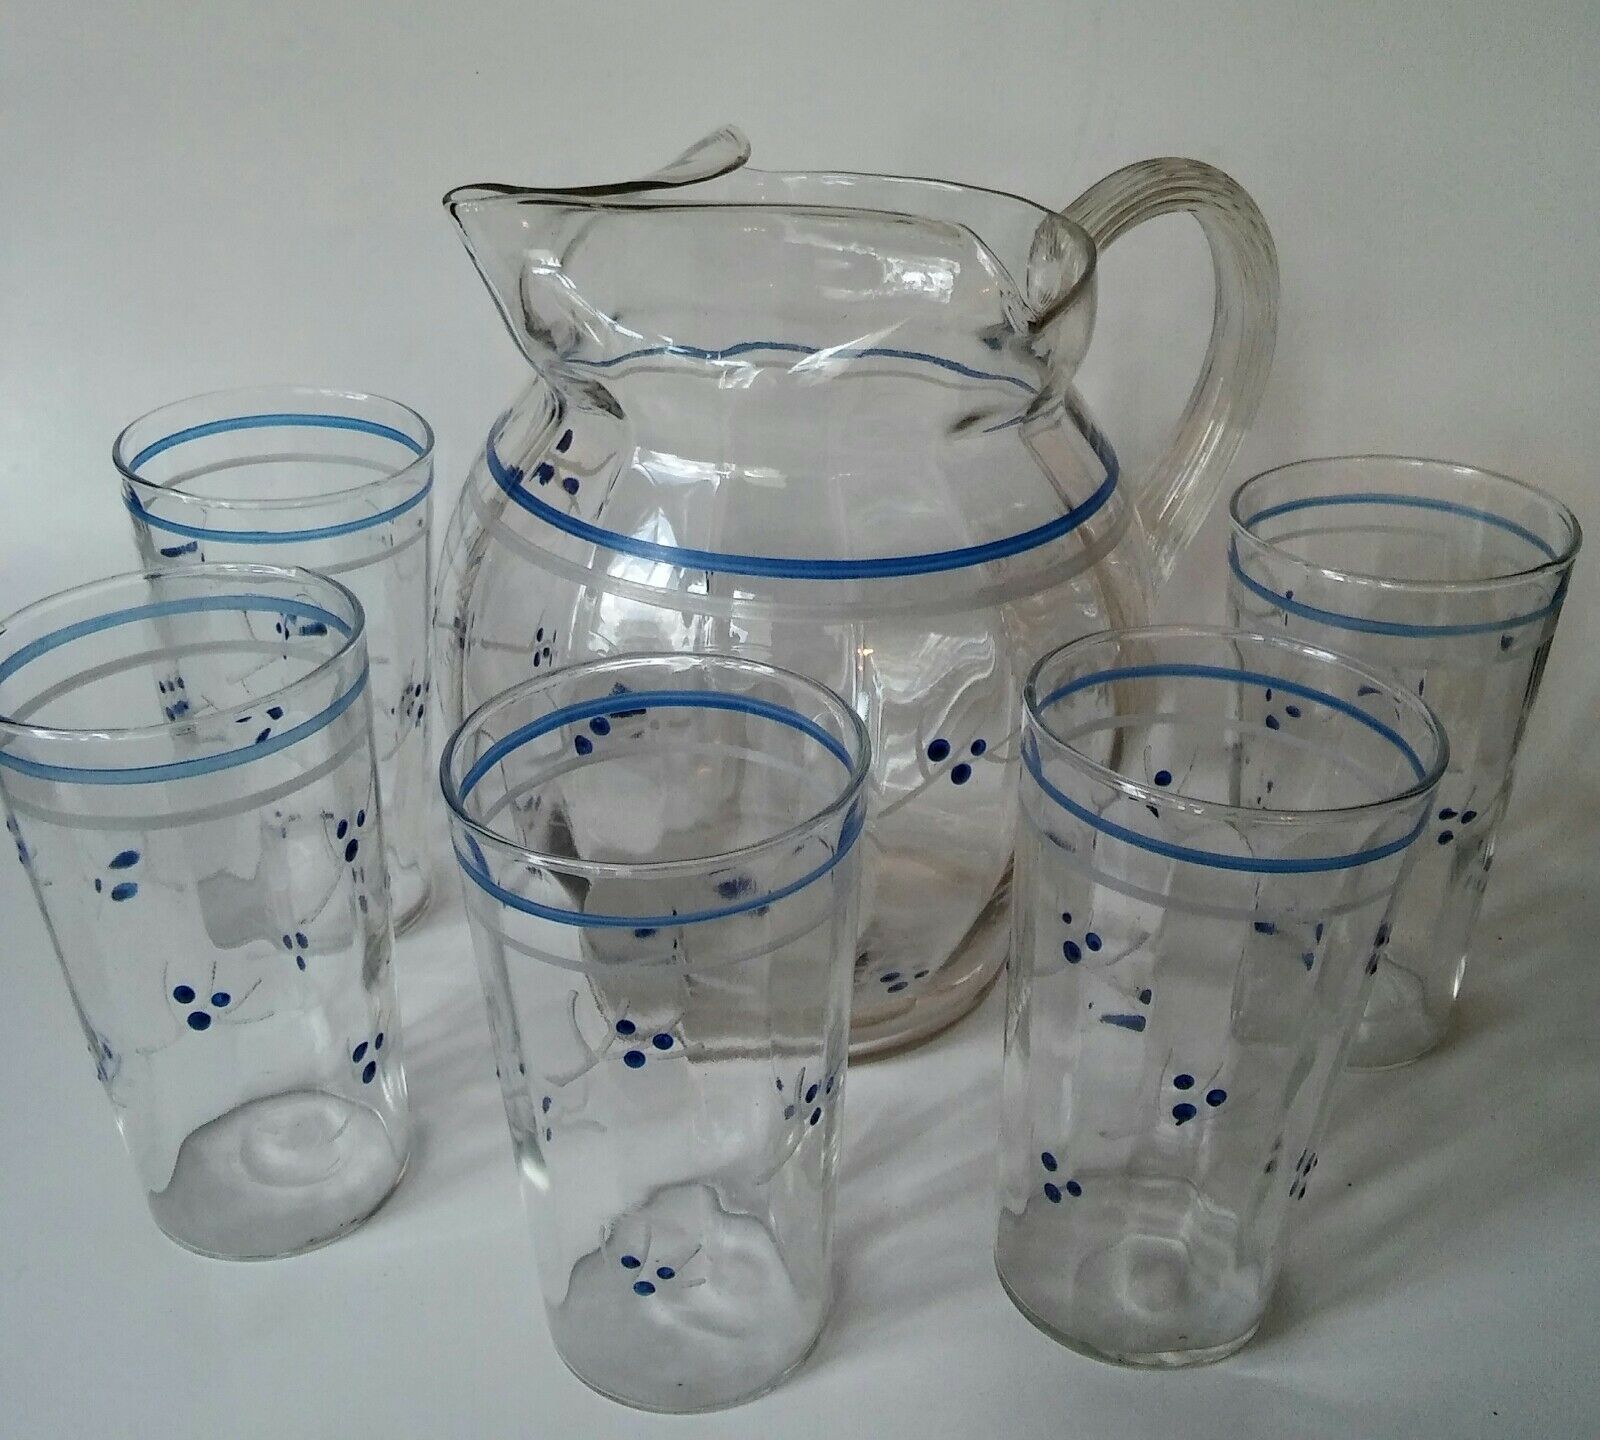 Macbeth Evans American Sweetheart Style Pitcher And Glasses